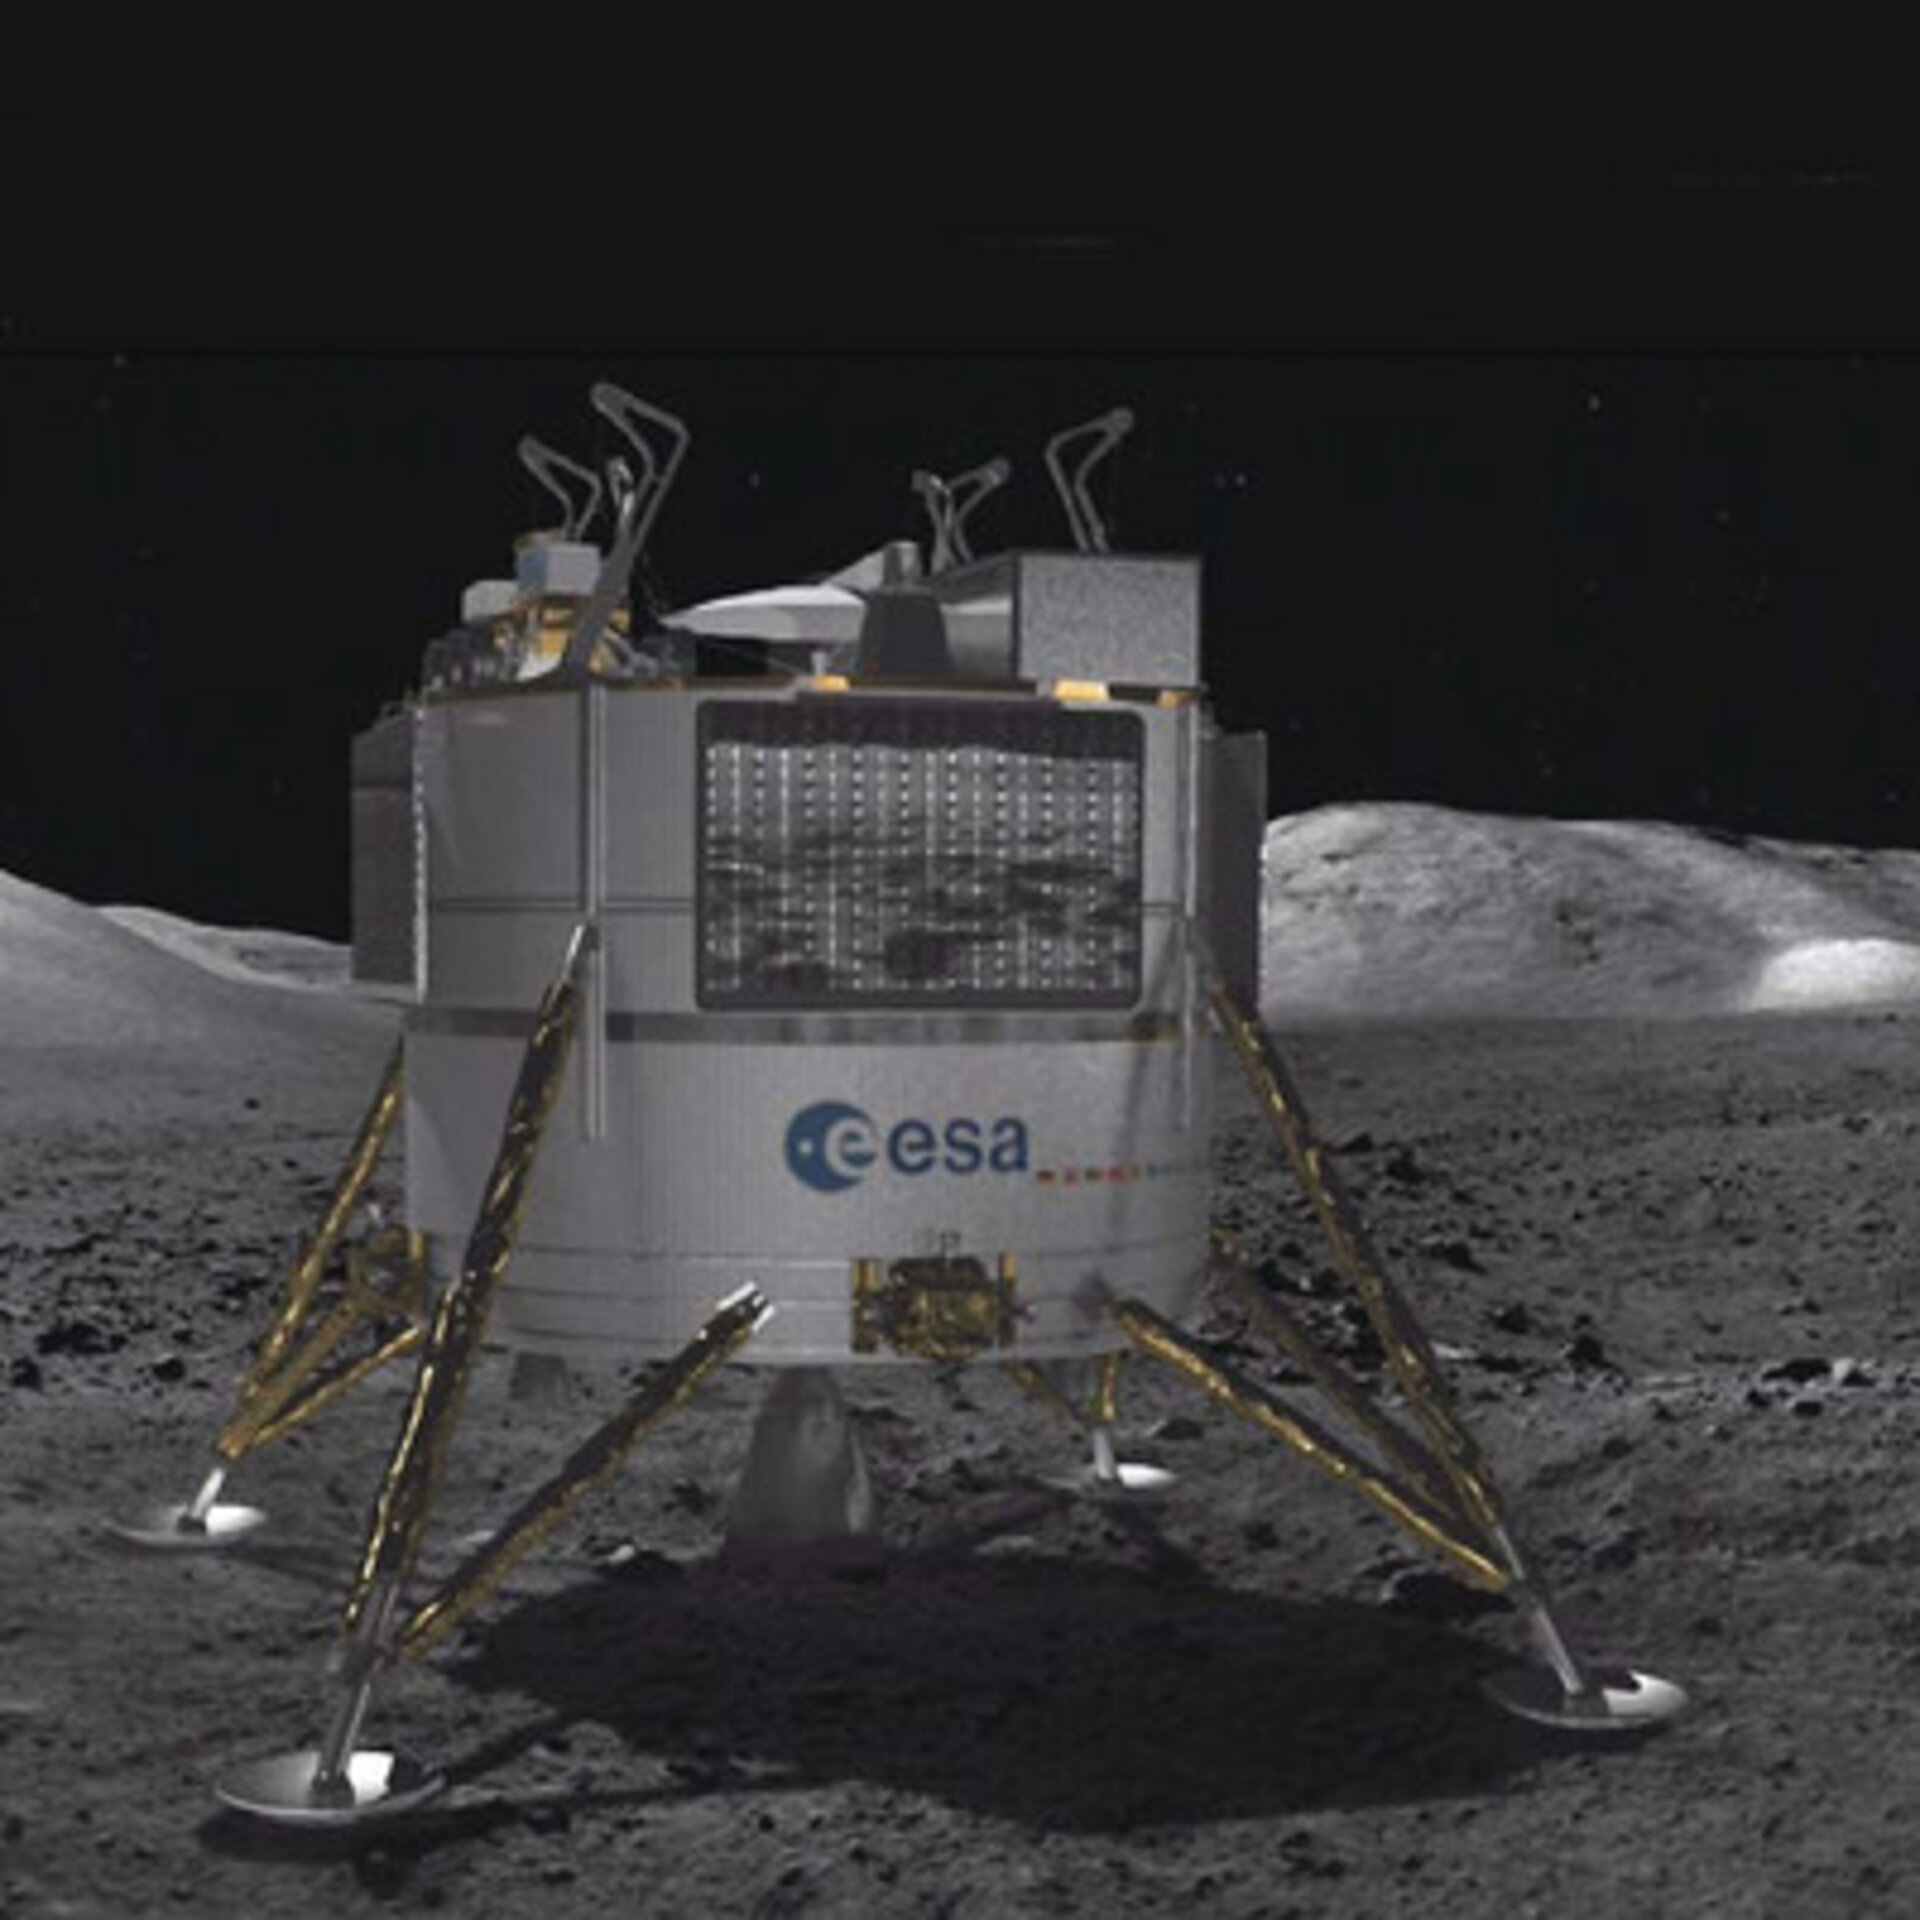 An autonomous lunar lander capable of cargo and logistics delivery would significantly extend surface exploration opportunities